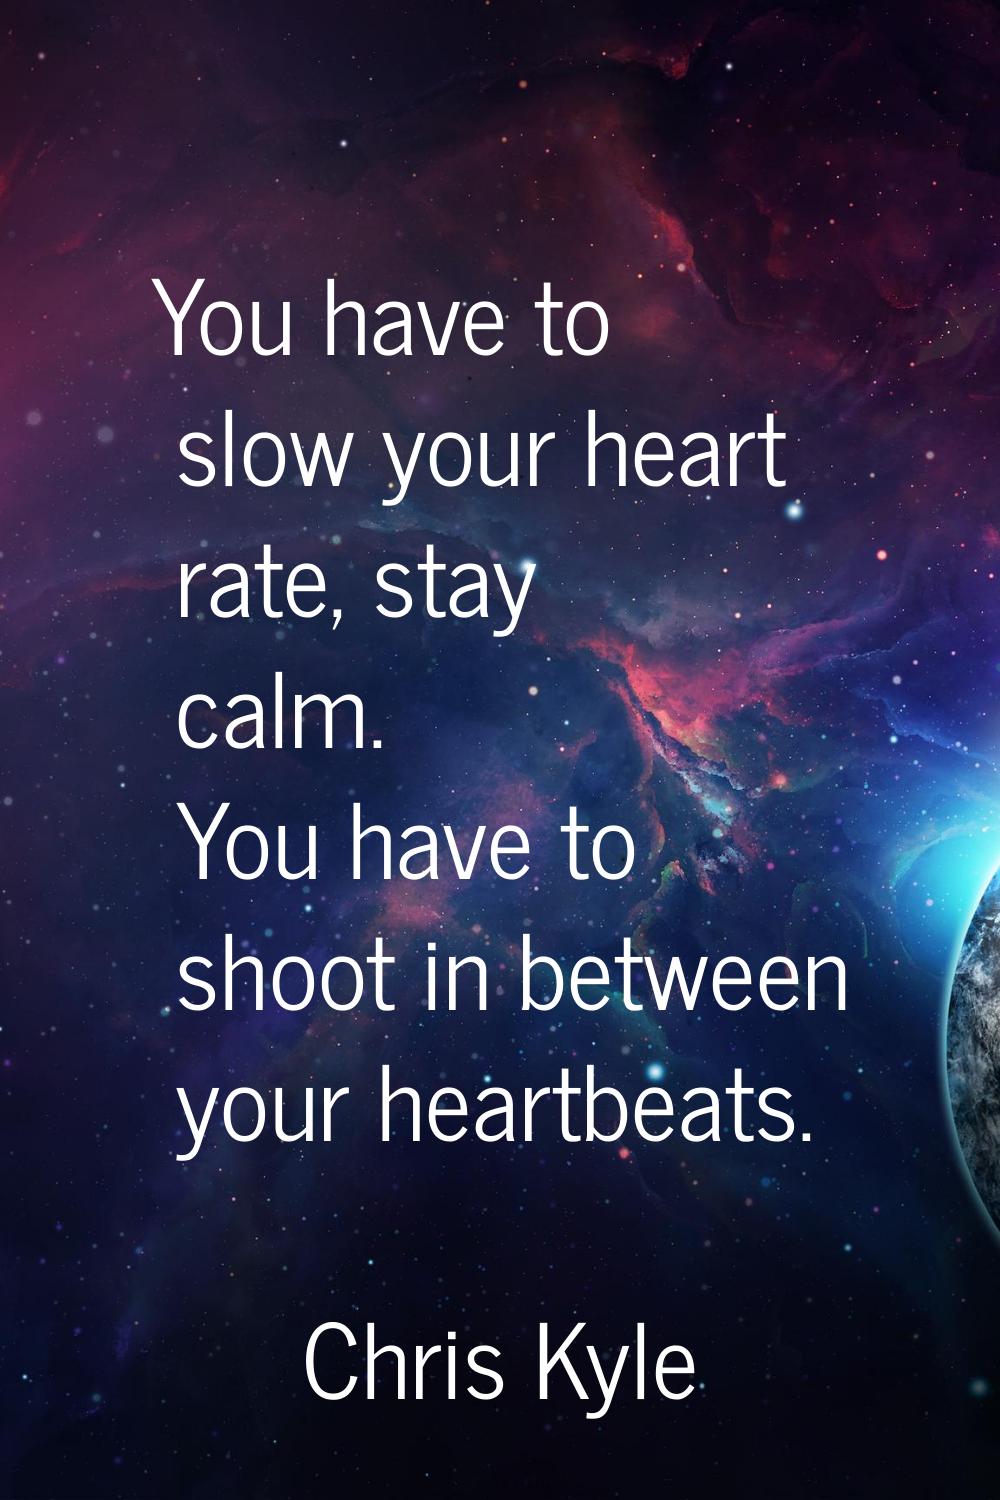 You have to slow your heart rate, stay calm. You have to shoot in between your heartbeats.